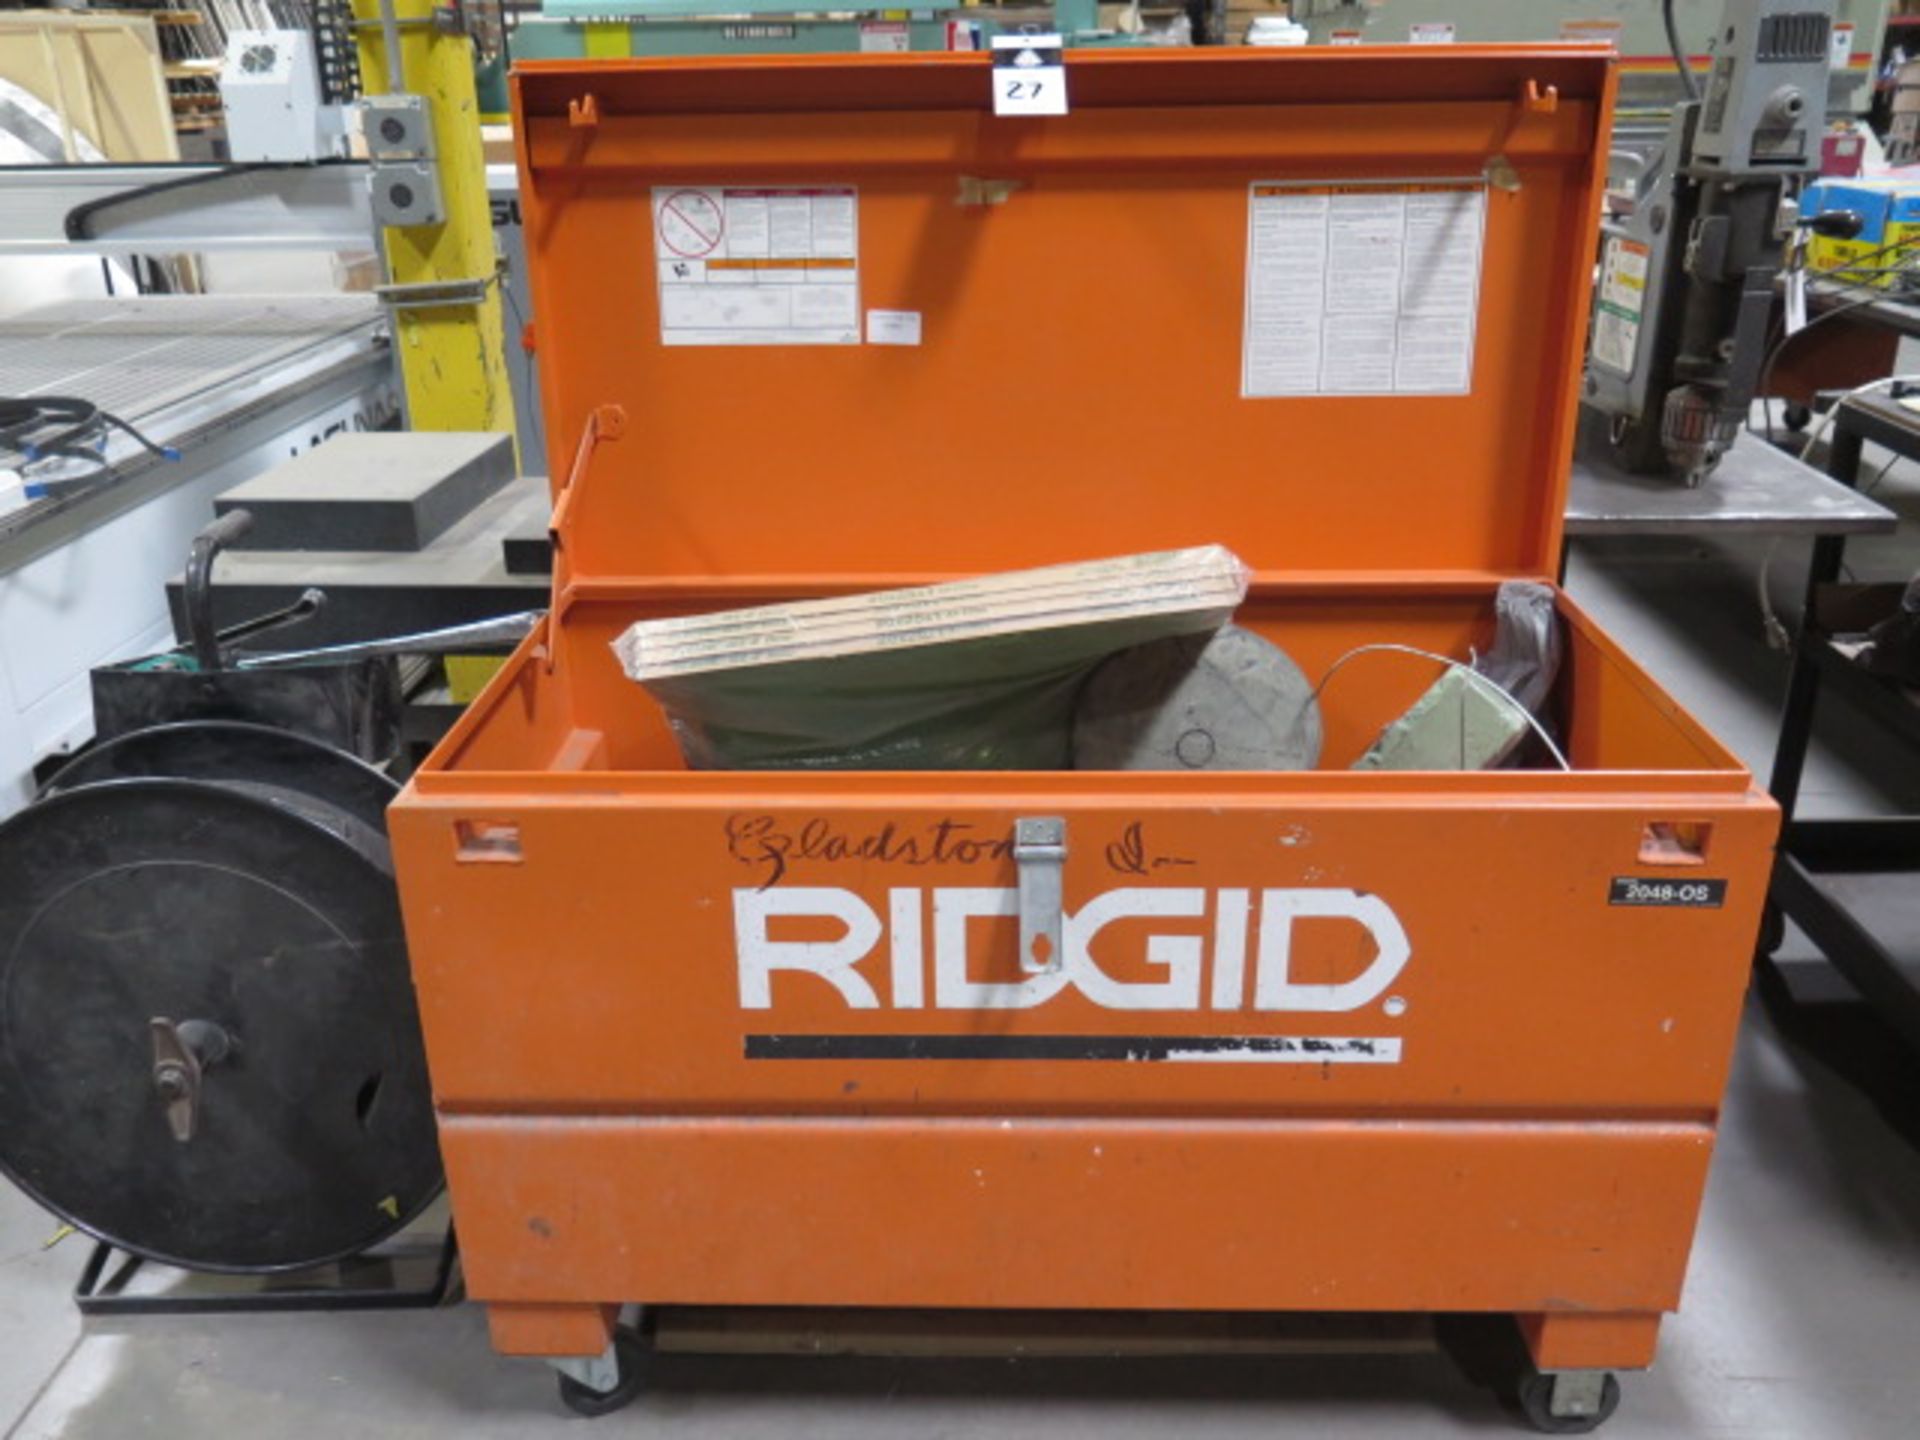 Ridgid mdl. 2048-OS Rolling Job Box w/ Misc (SOLD AS-IS - NO WARRANTY) - Image 3 of 9